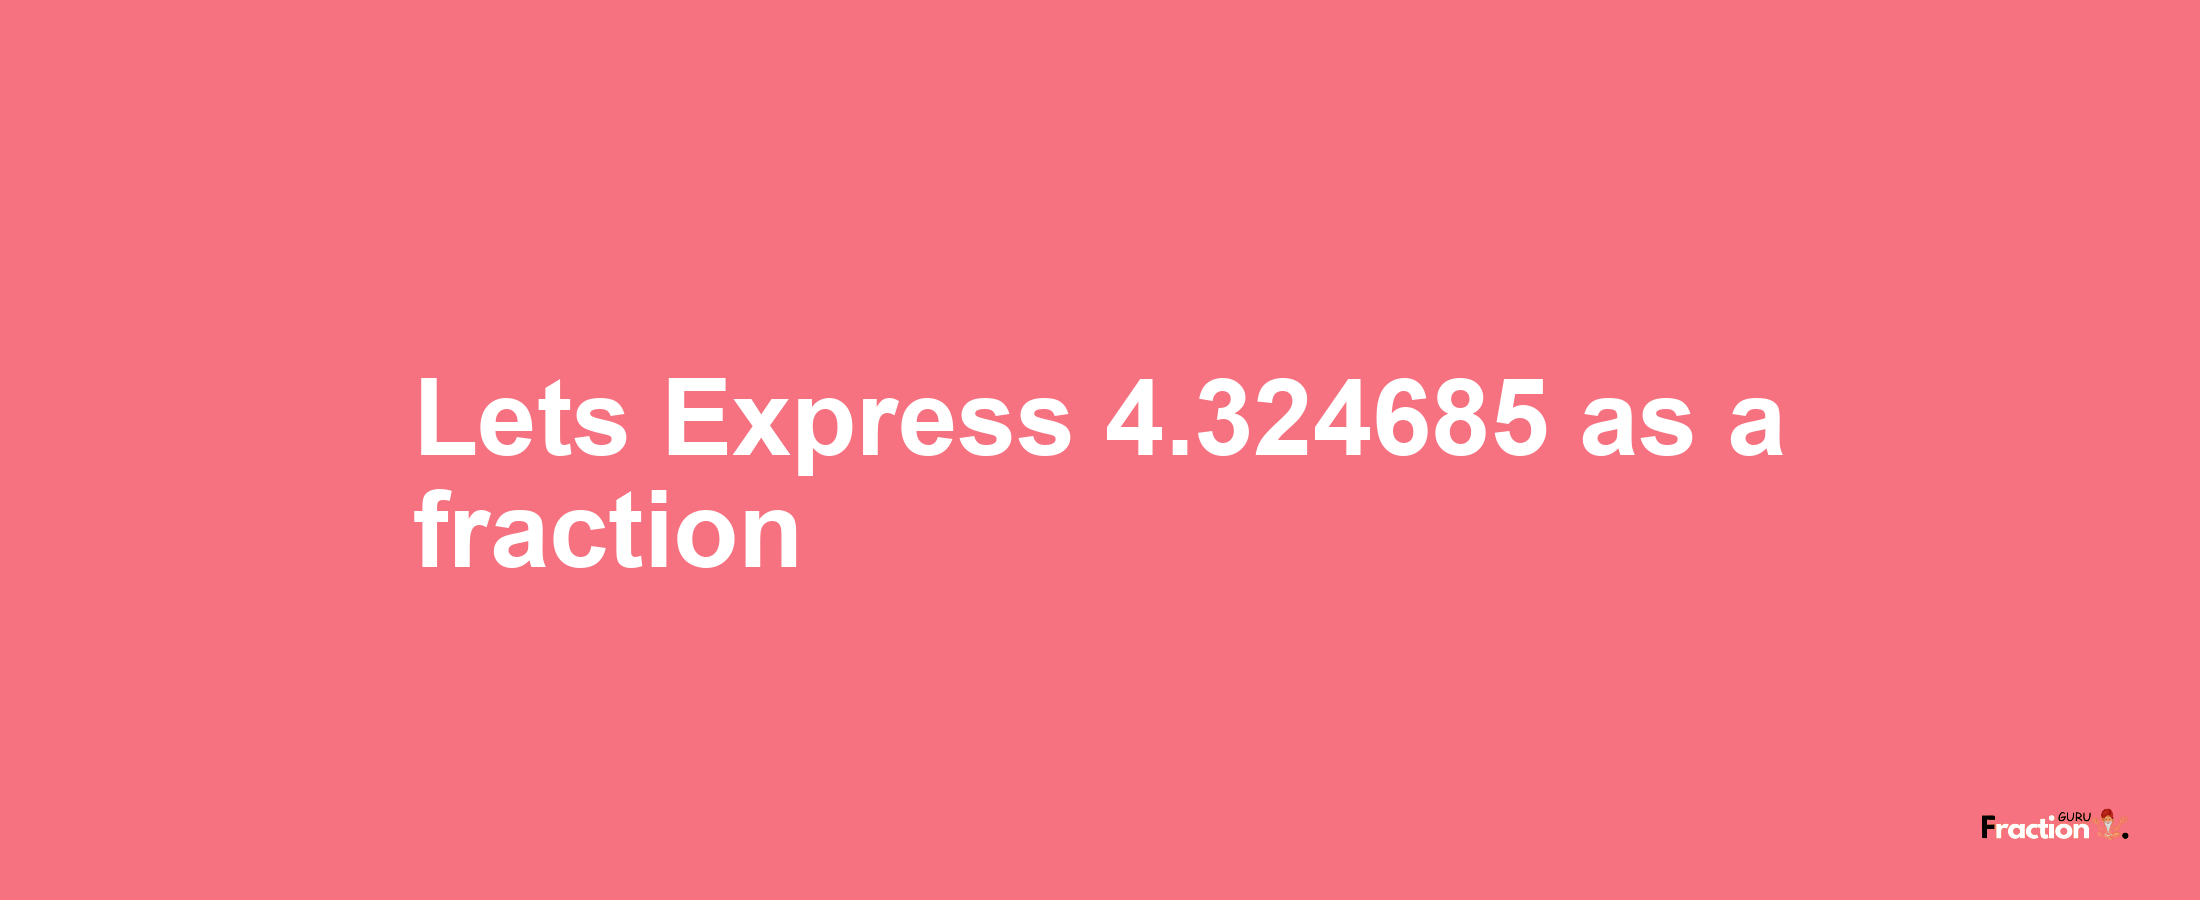 Lets Express 4.324685 as afraction